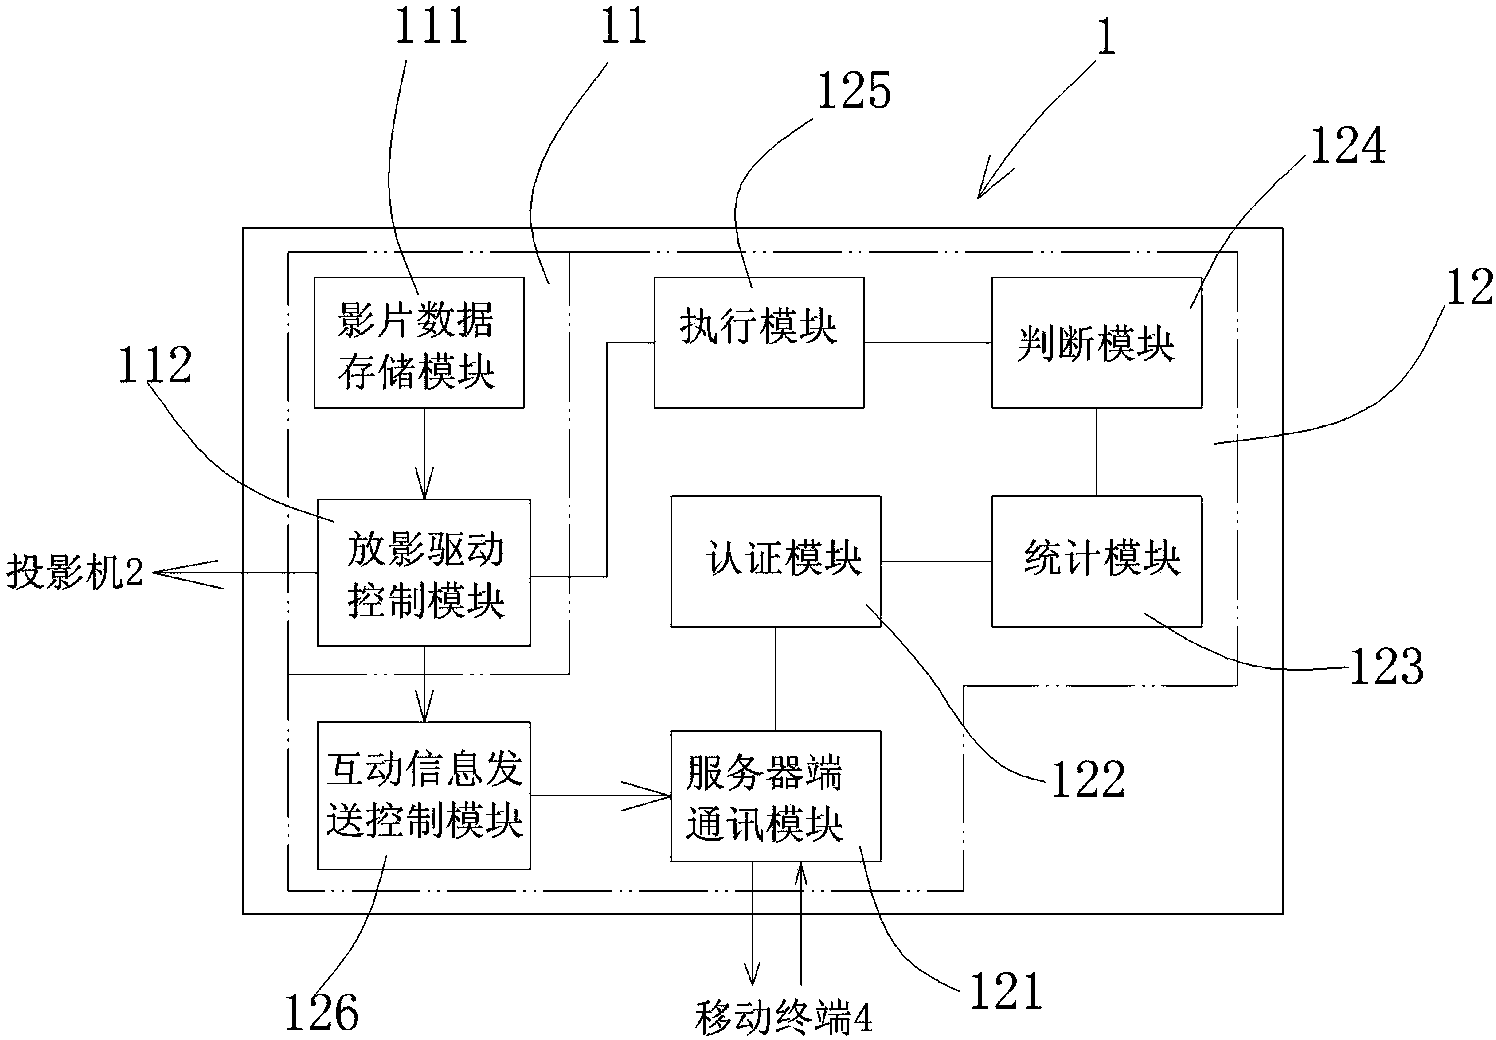 Film showing system with interaction function and method for interacting with audiences during showing